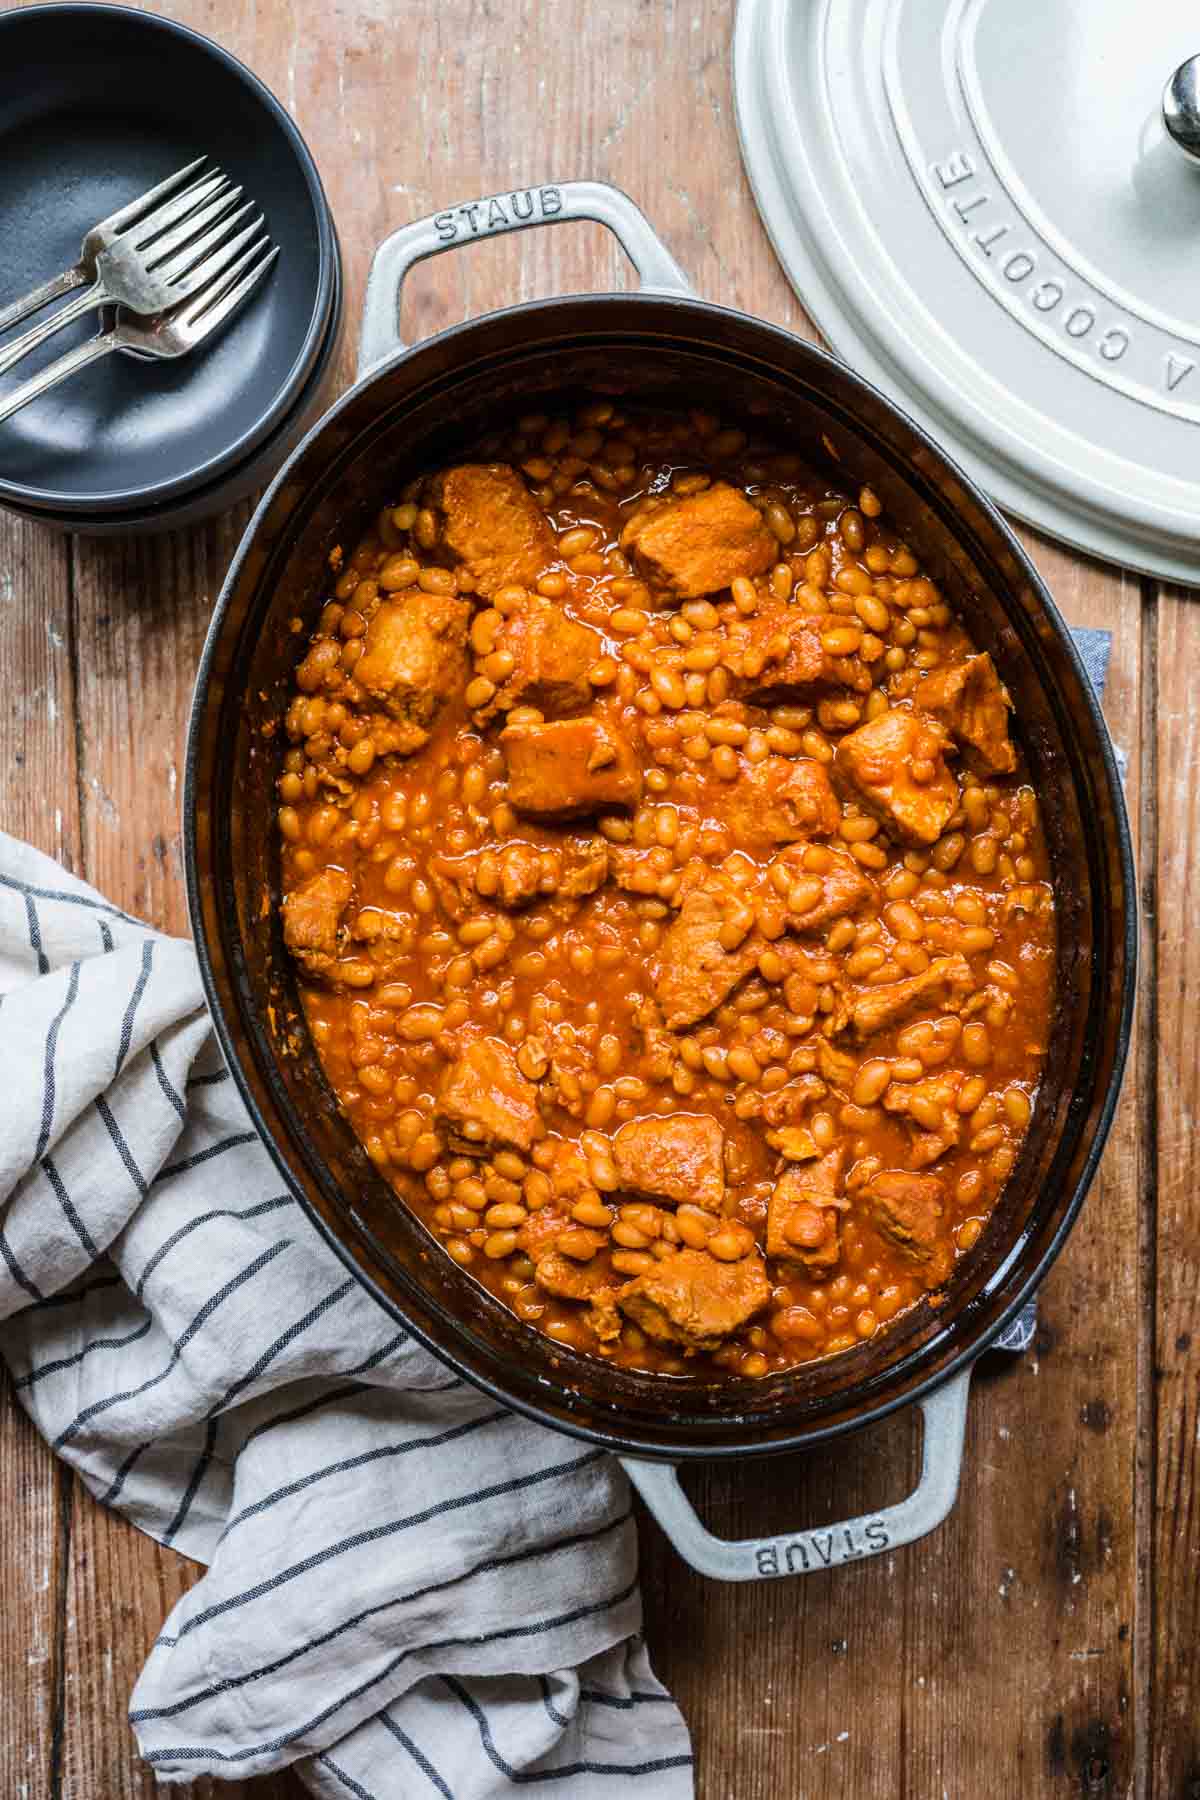 Roast Pork and Beans cooked in large oval baking dish